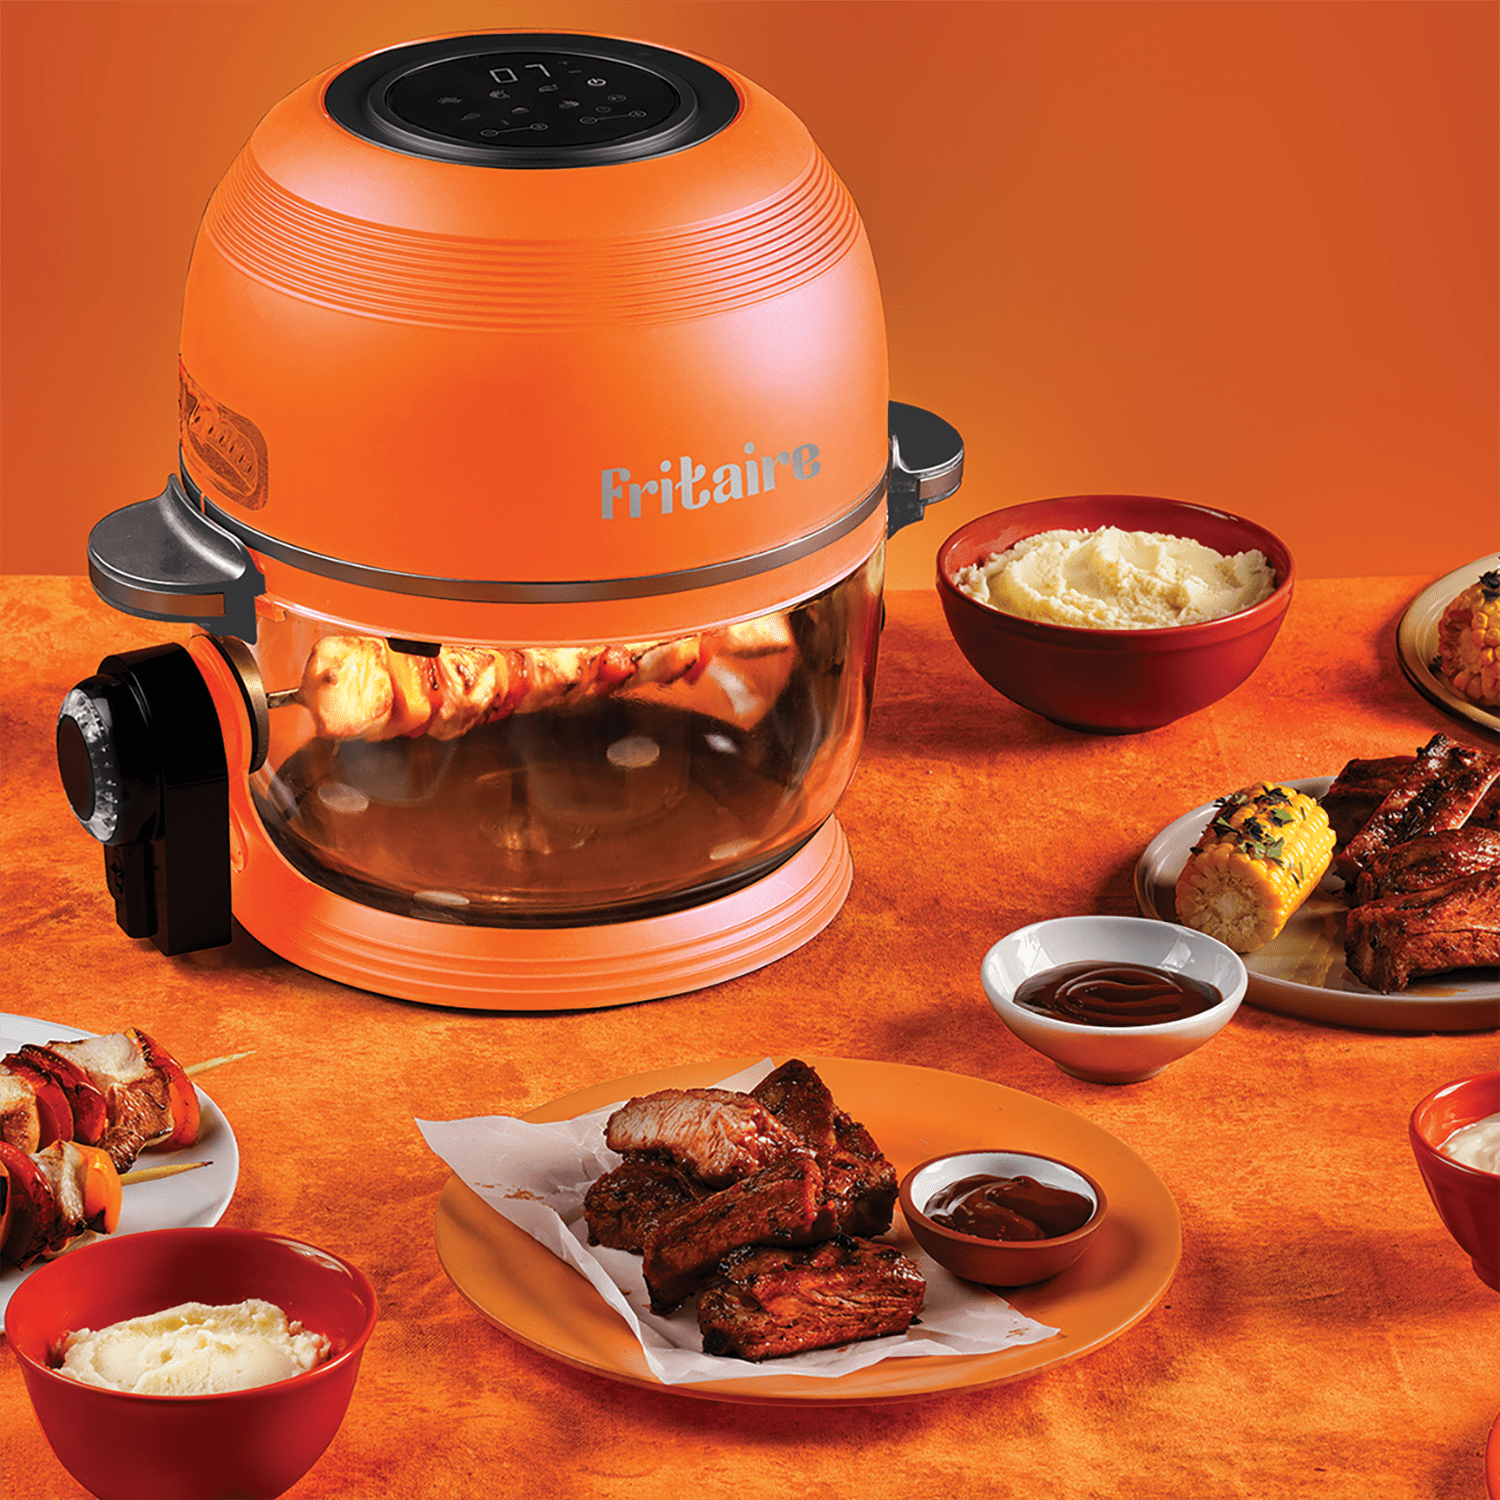 Fritaire Fritaire, Self-Cleaning Glass Bowl Air Fryer, 5 qt., 6 Functions, BPA  Free, Rotisserie/Tumbler, Orange Fritaire-01-OR - The Home Depot